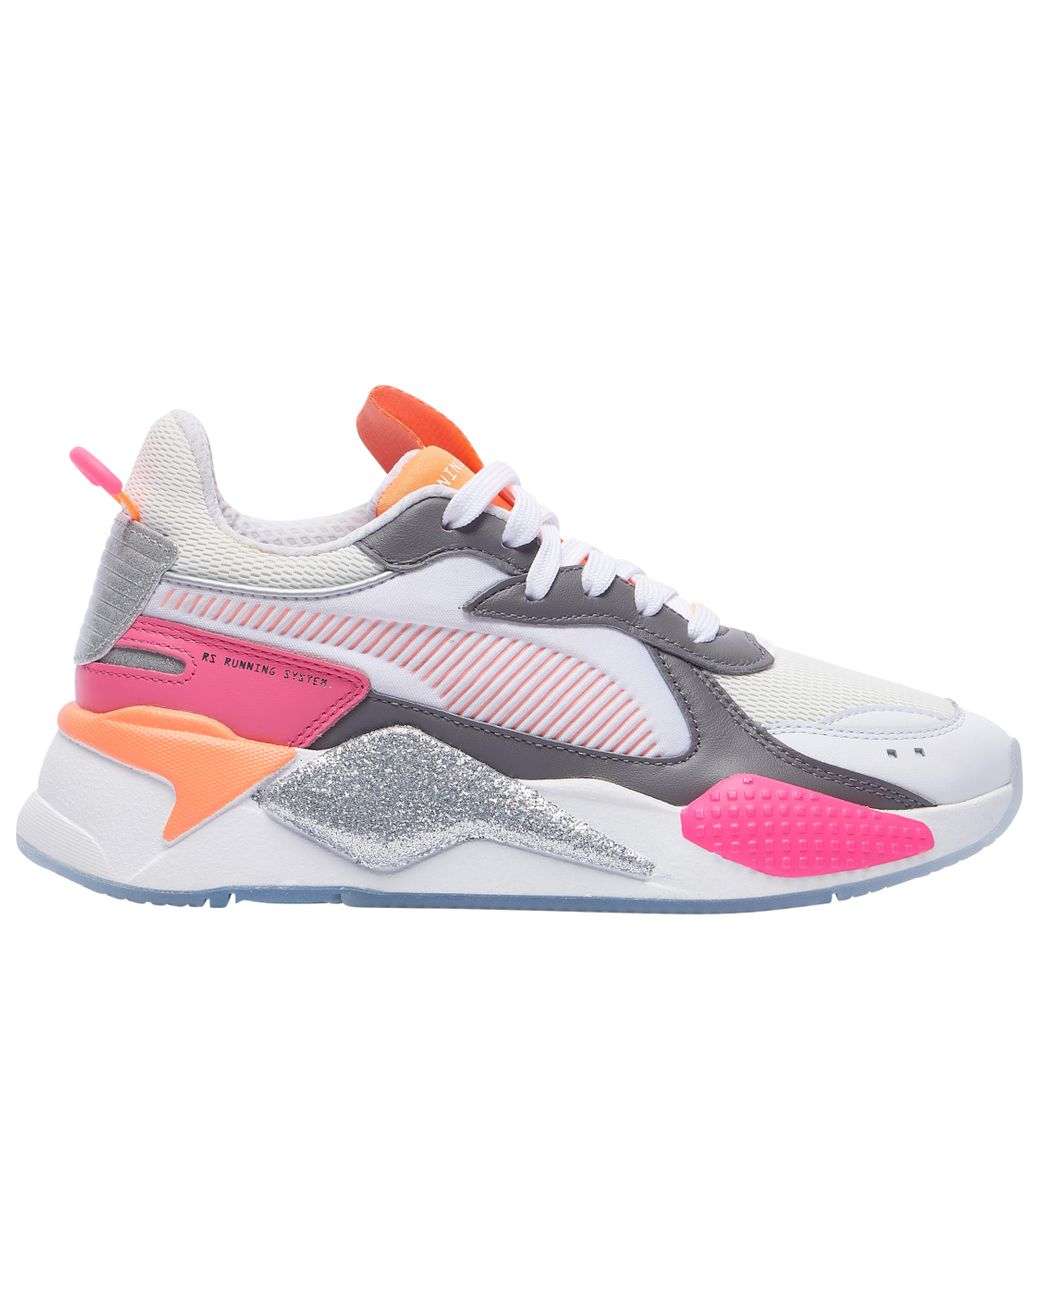 PUMA Rubber Rs-x in Pink - Lyst